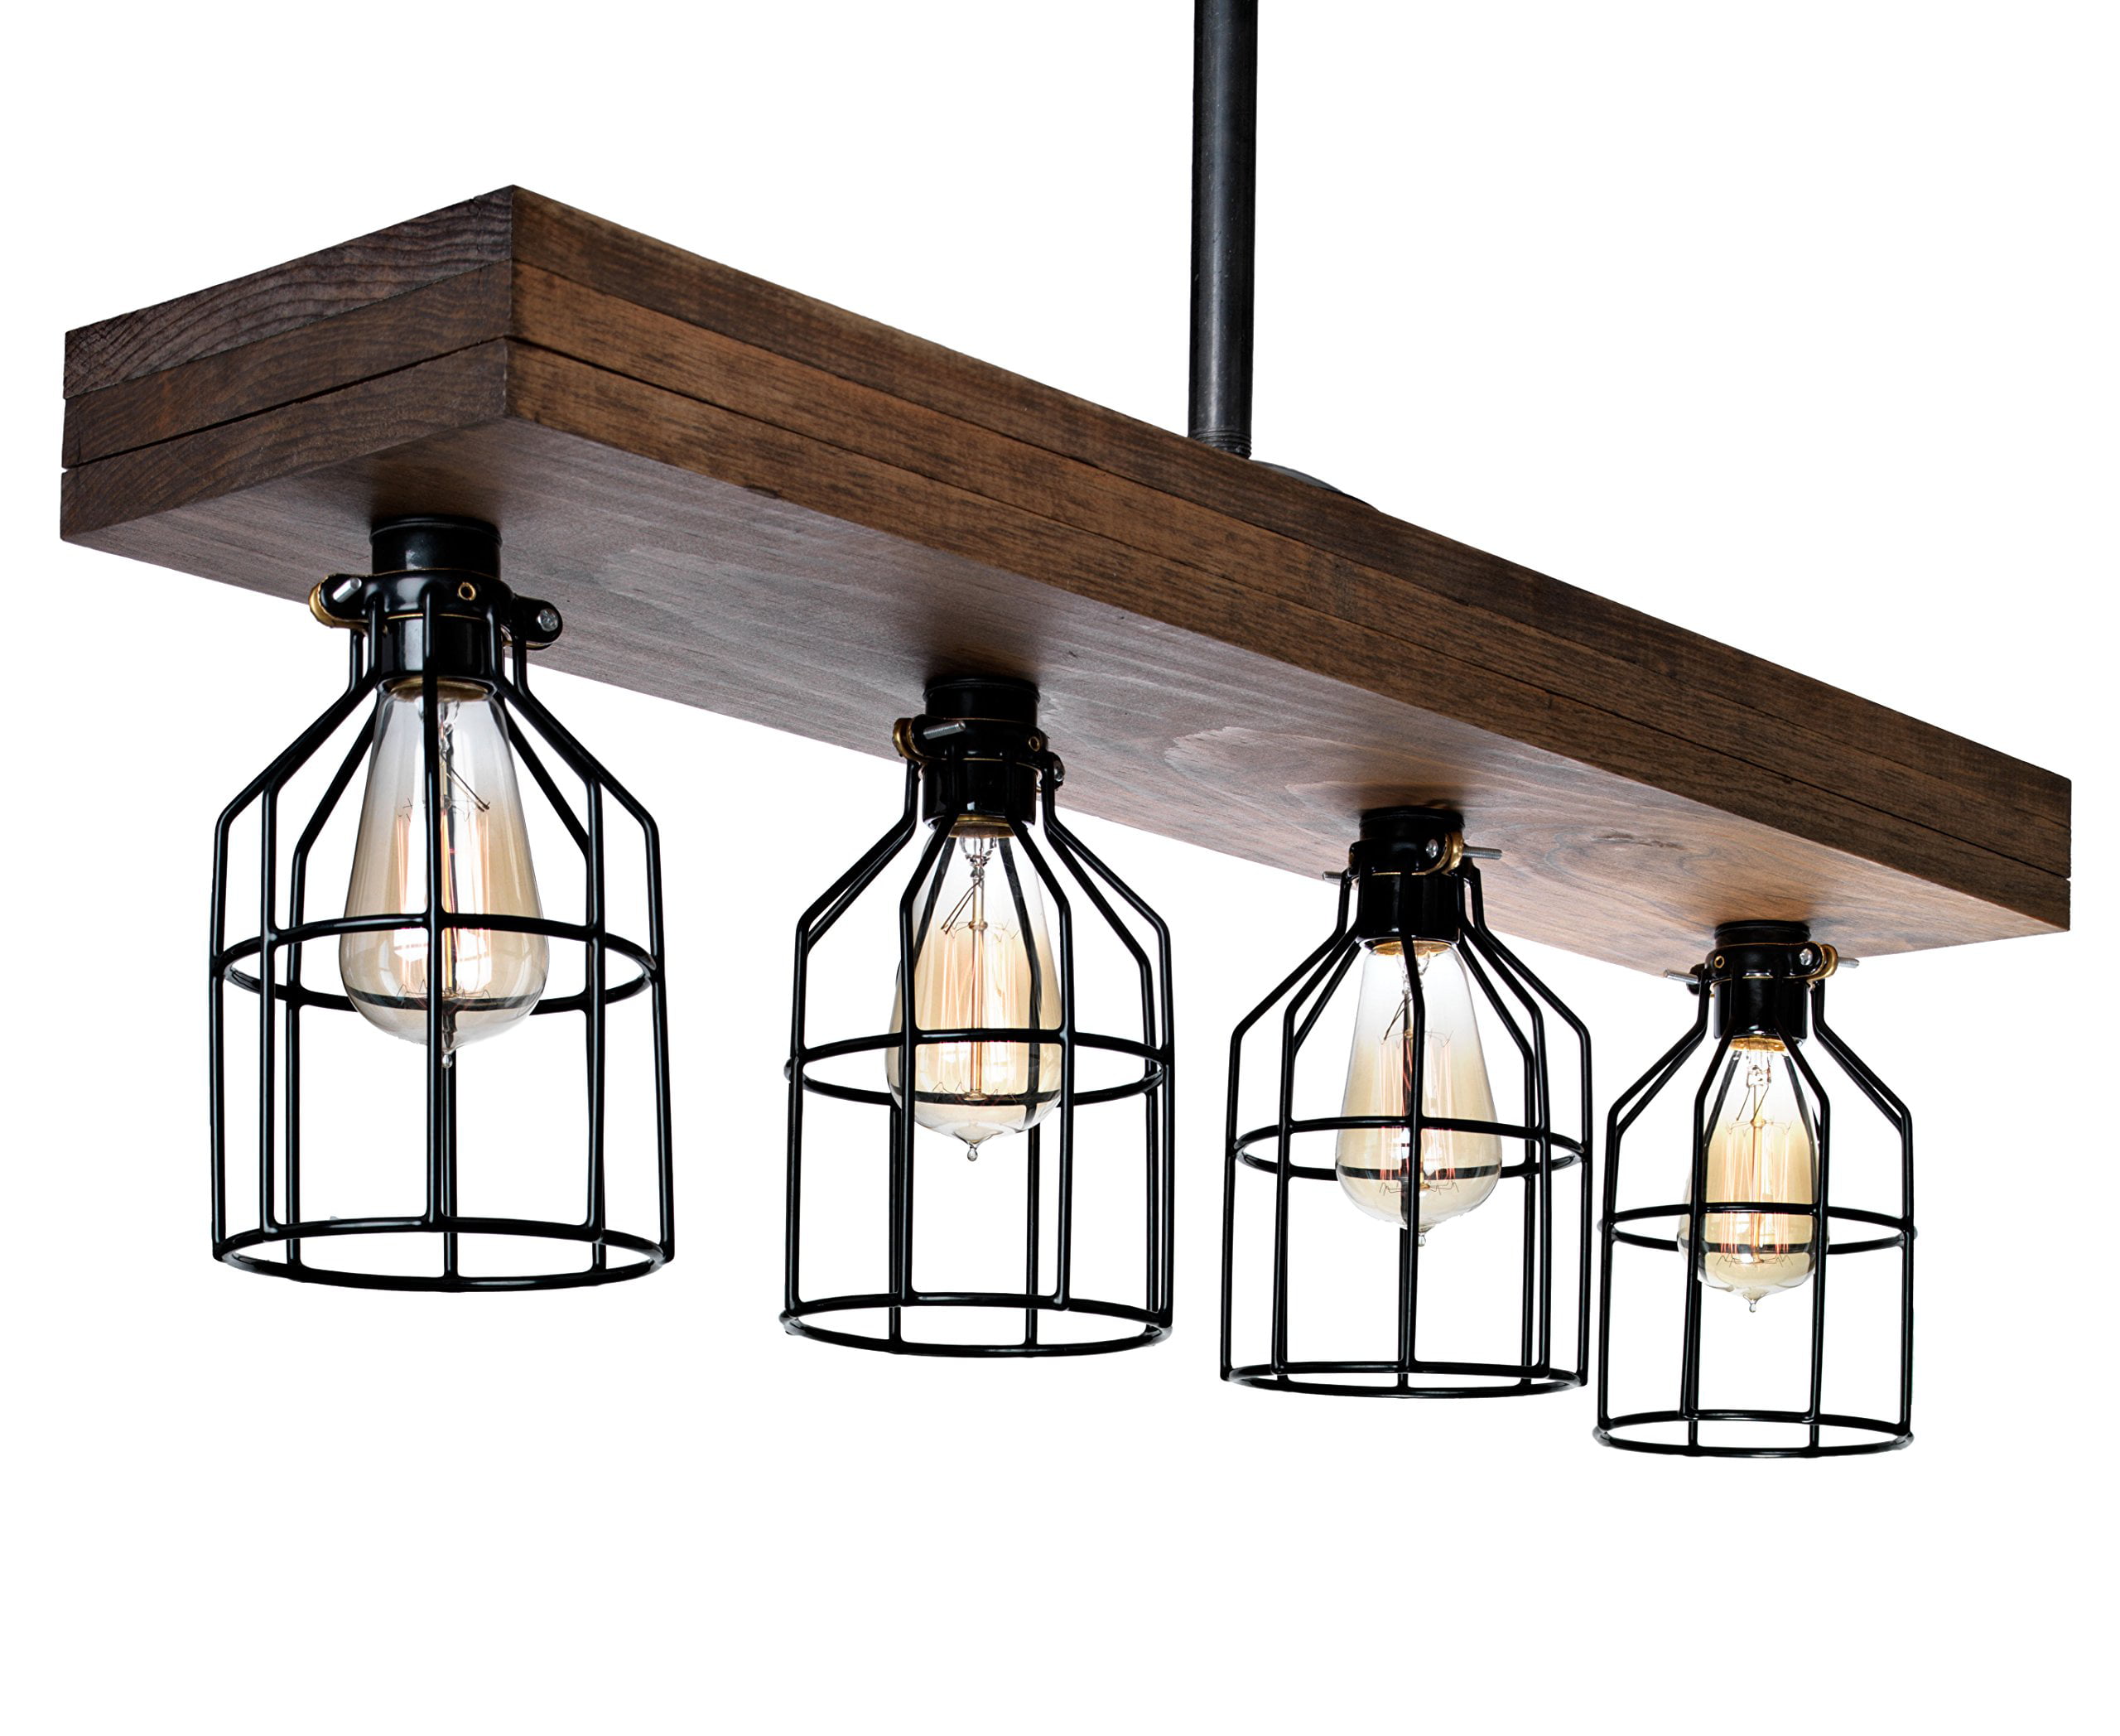 Industrial Reclaimed Wood from Early-1900s Farmhouse Lighting Rustic Lighting for Kitchen Island Lighting and Billiard Table-Wooden Light with Edison Cages Bar Dining Room